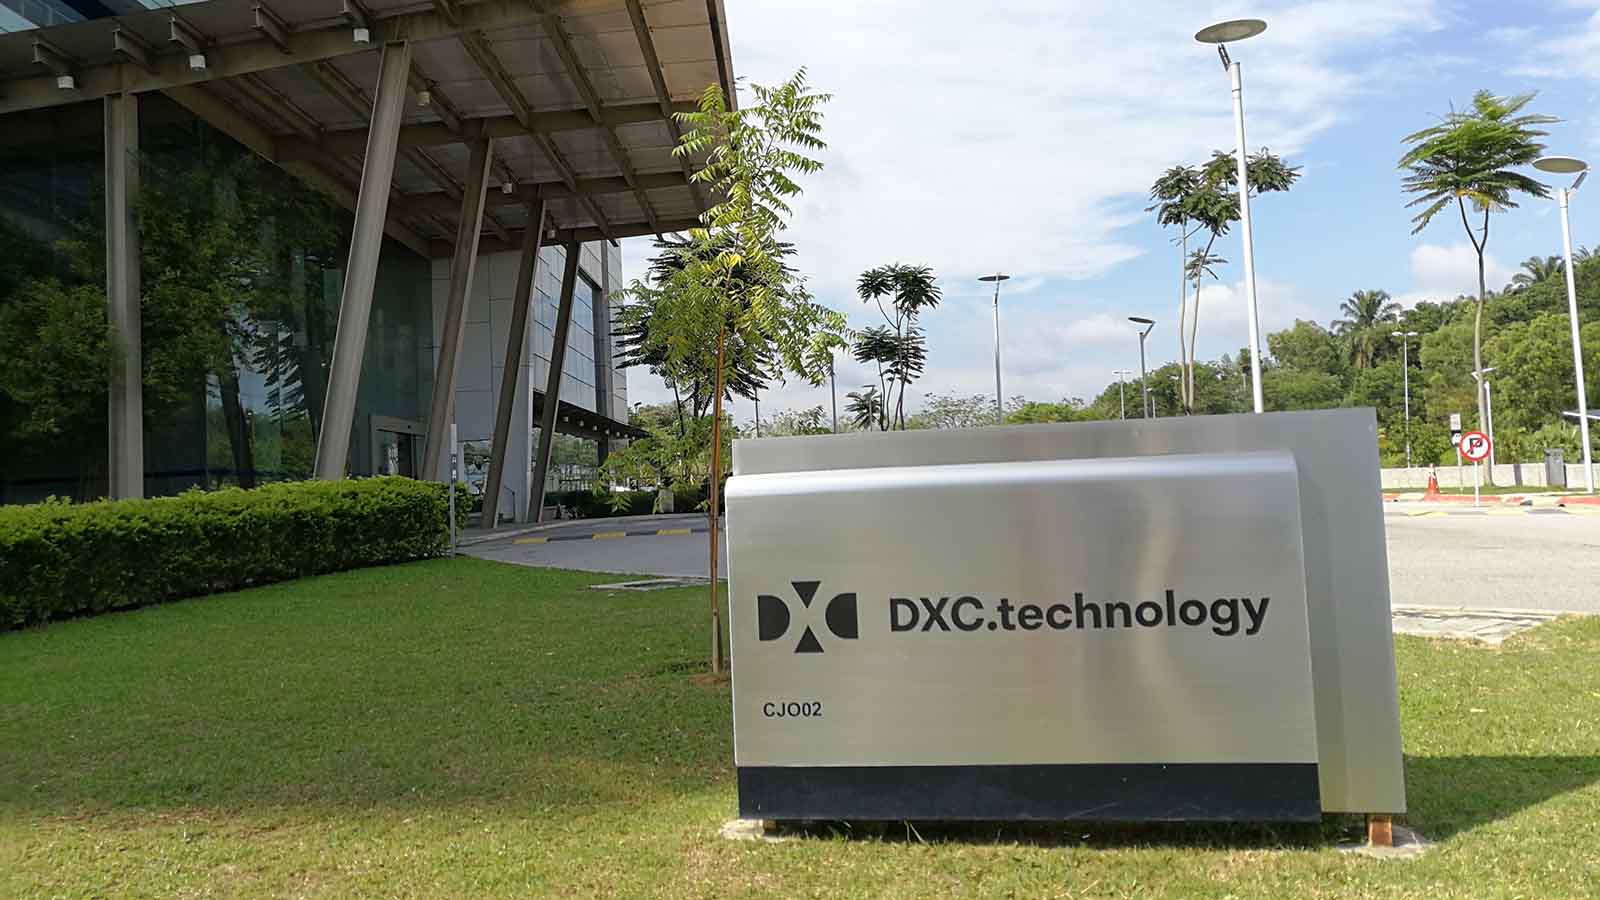 What Caused DXC Technology (DXC) Stock to Drop by 24% Today?